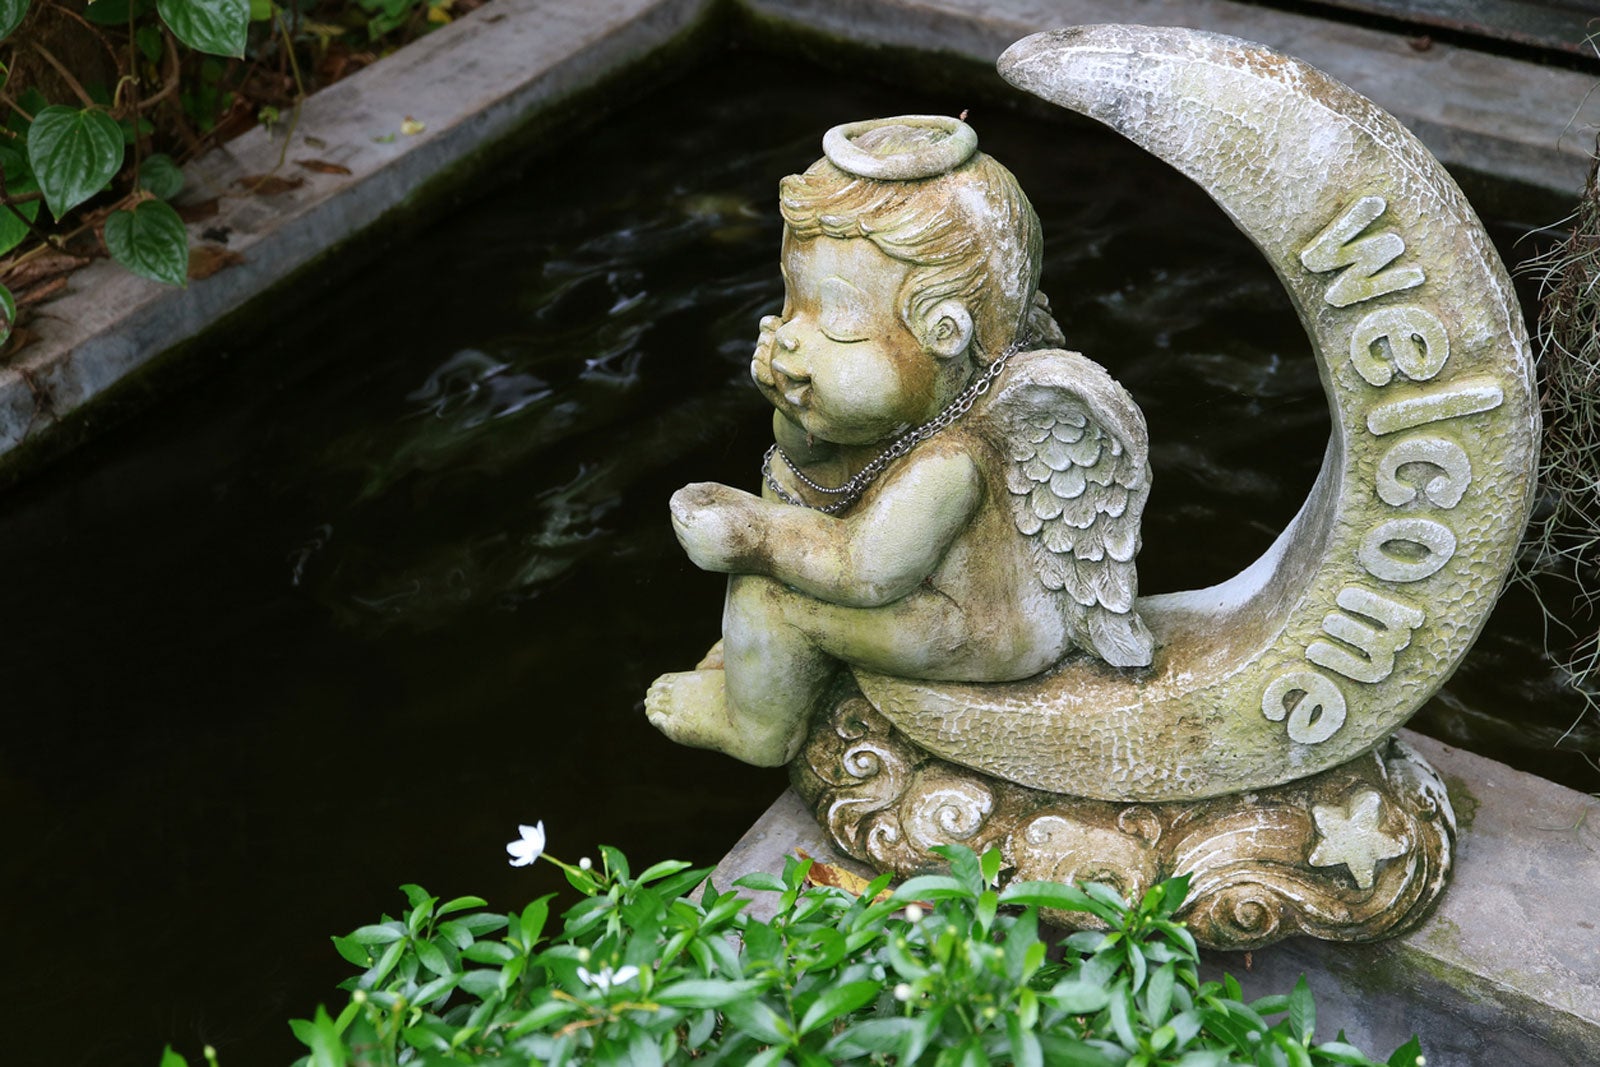 Landscaping With Statues: Using Garden Sculptures Effectively